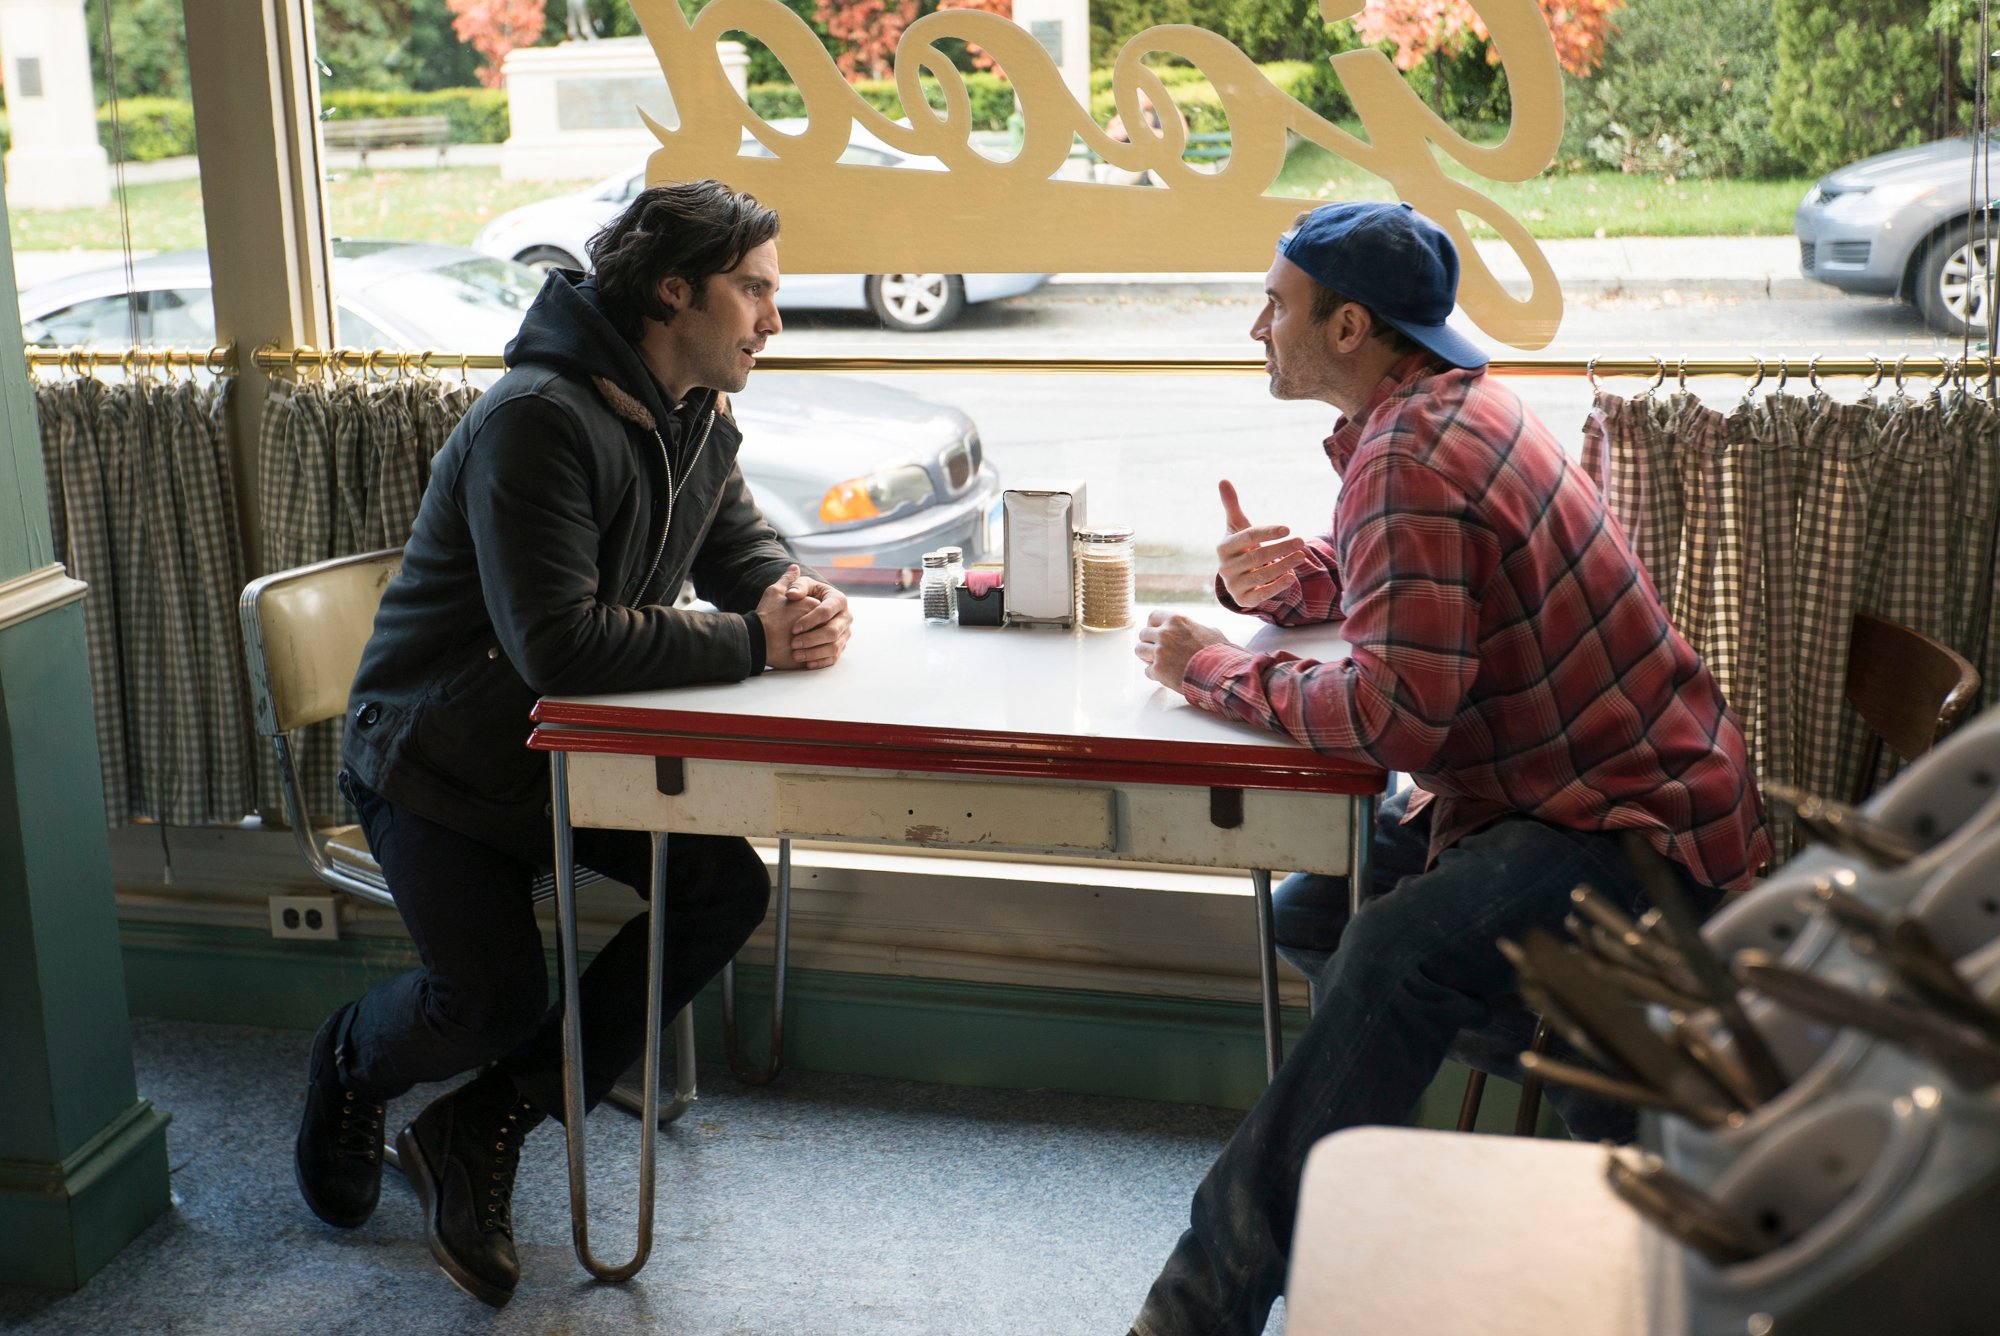 Milo Ventimiglia and Scott Patterson as Jess and Luke in 'Gilmore Girls: A Year in the Life' on Netflix. They're sitting at a table in Luke's Diner. Jess is a part of one of the Gilmore Girls plot holes fans are still taking about.